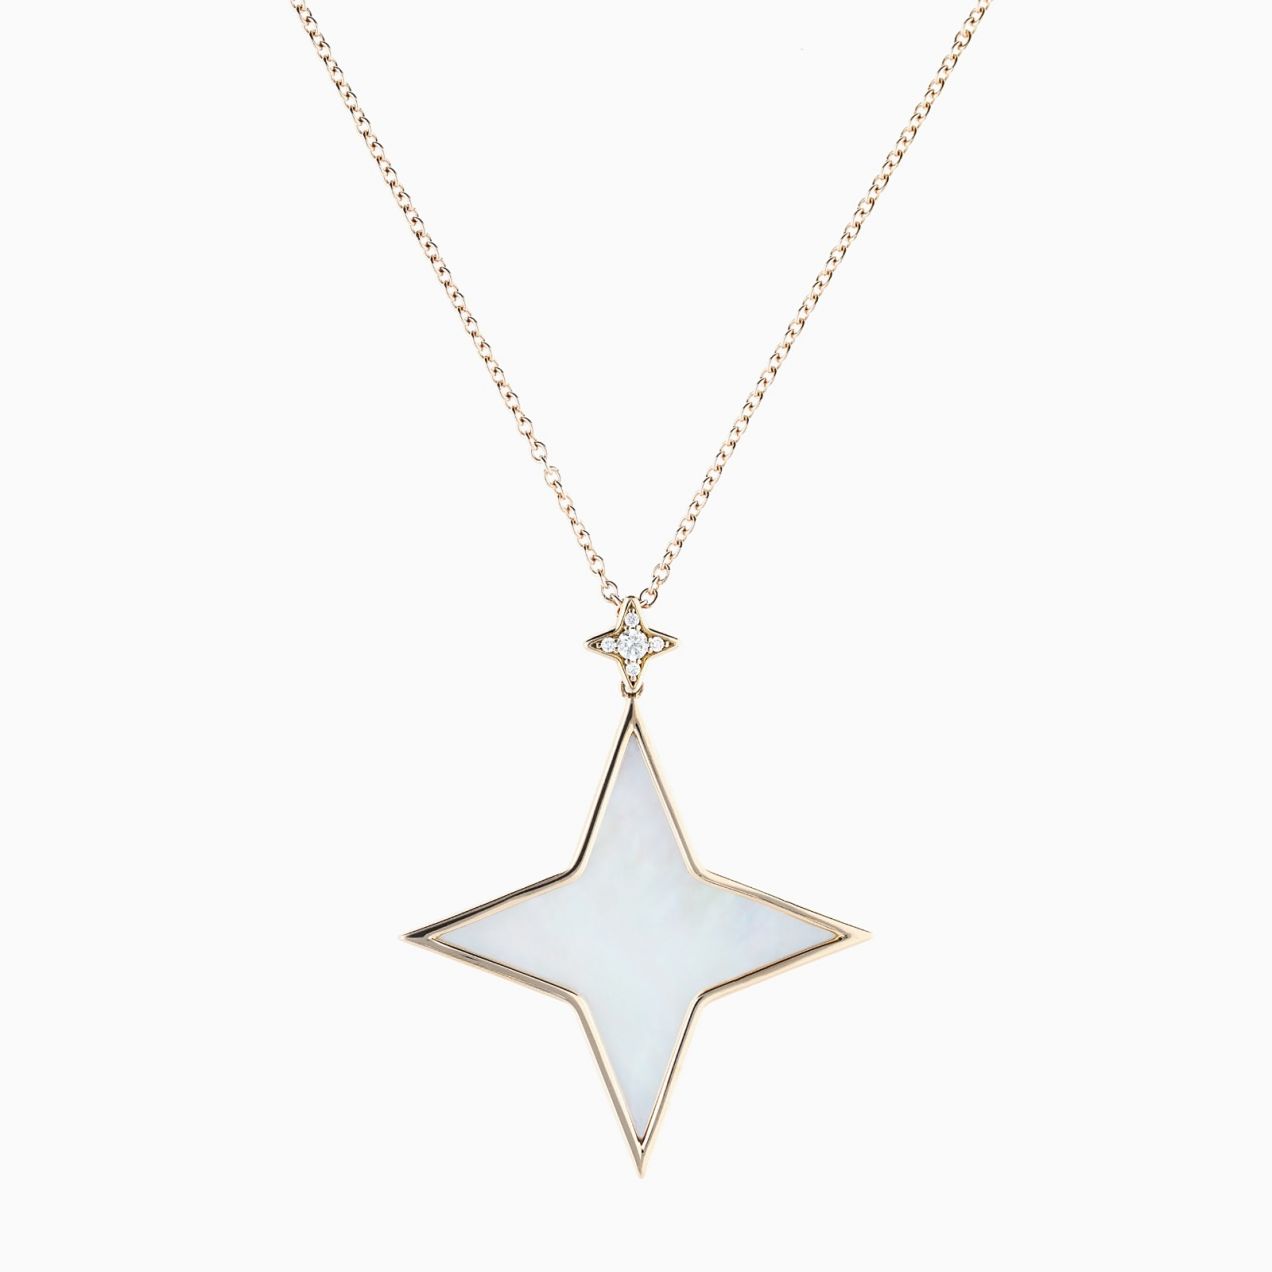 Rose gold star pendant with central pearl and diamonds